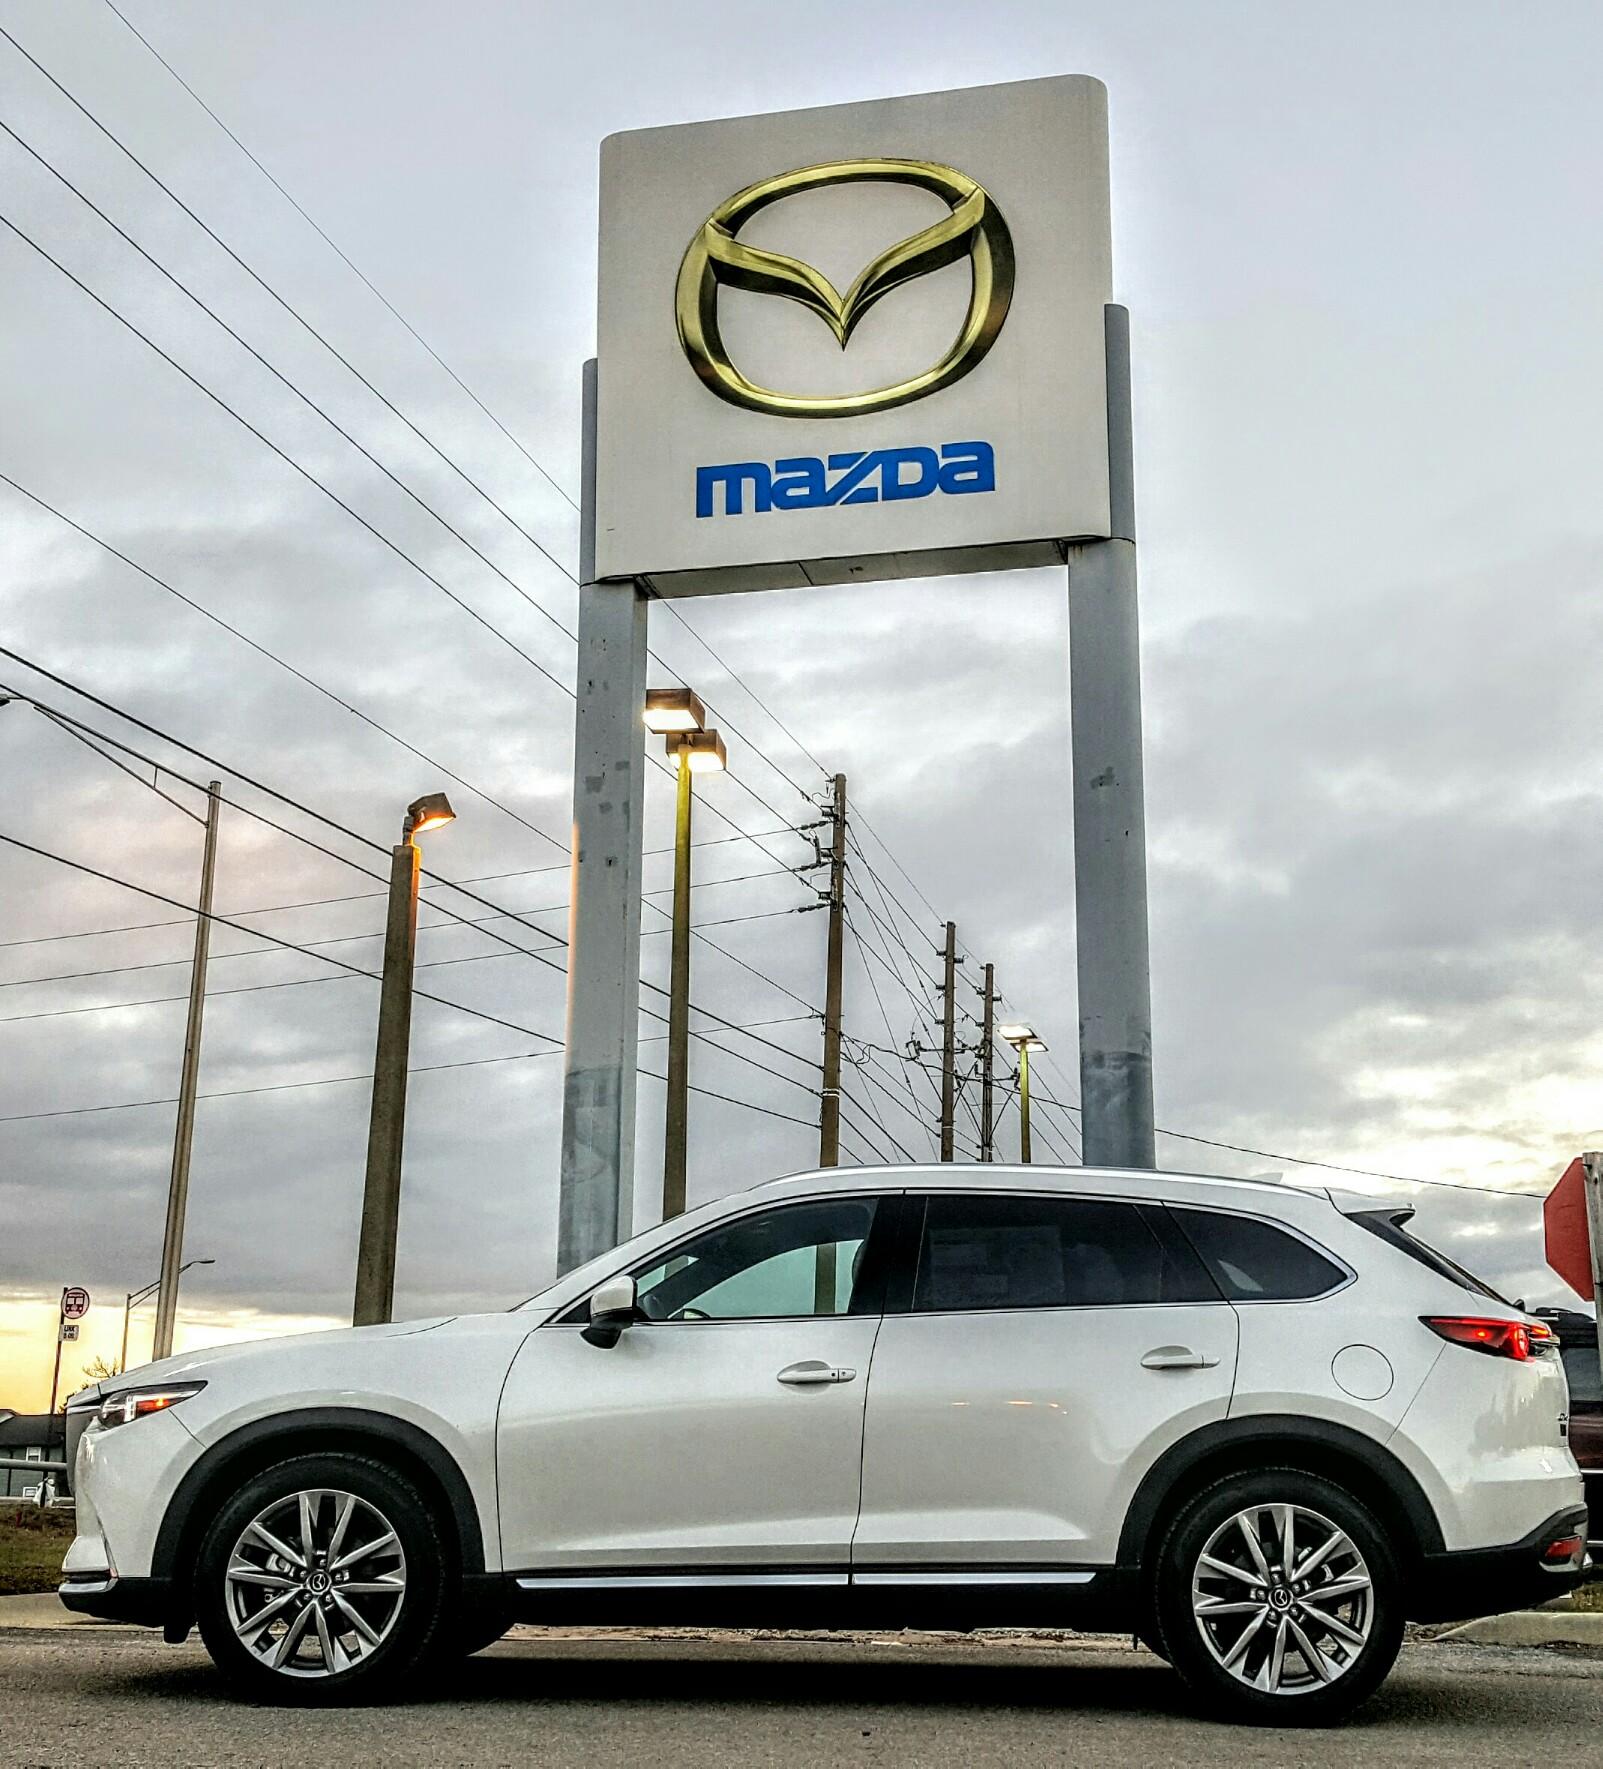 The one upside of the car crash? We are now proud new owners of a Mazda CX-5!